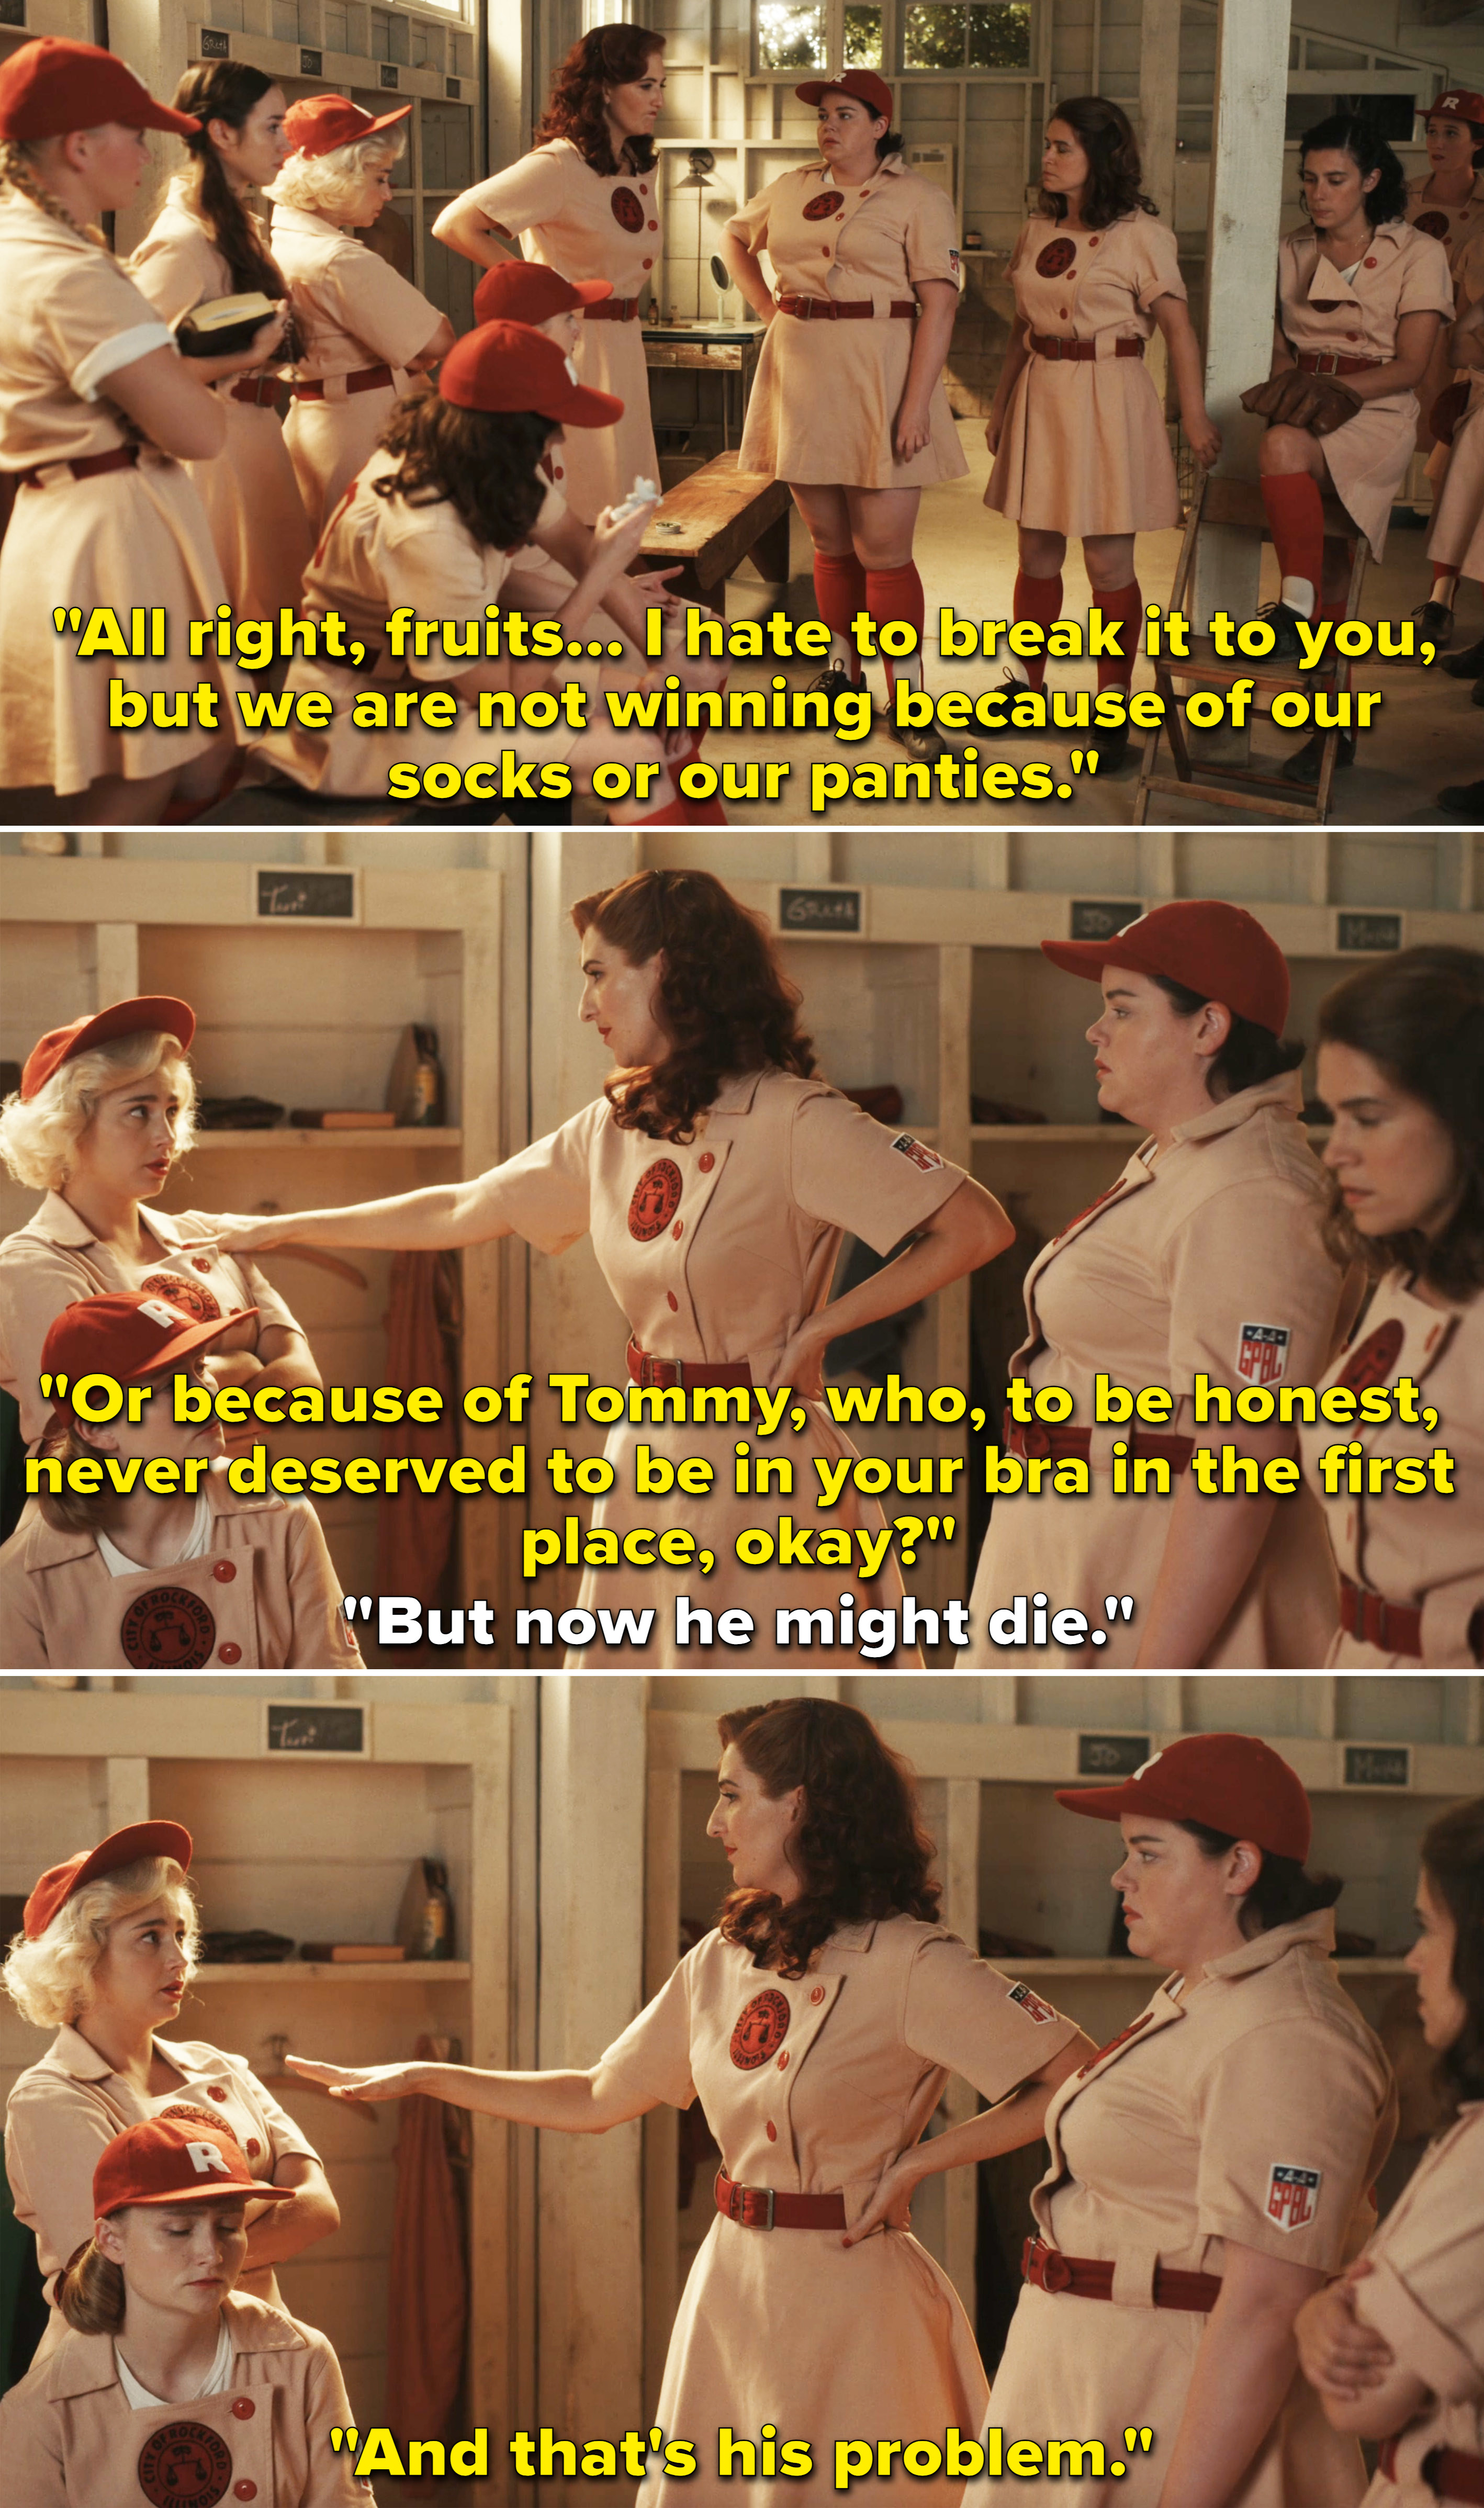 Greta rallying the team in the locker room in a scene from &quot;A League of Their Own&quot;